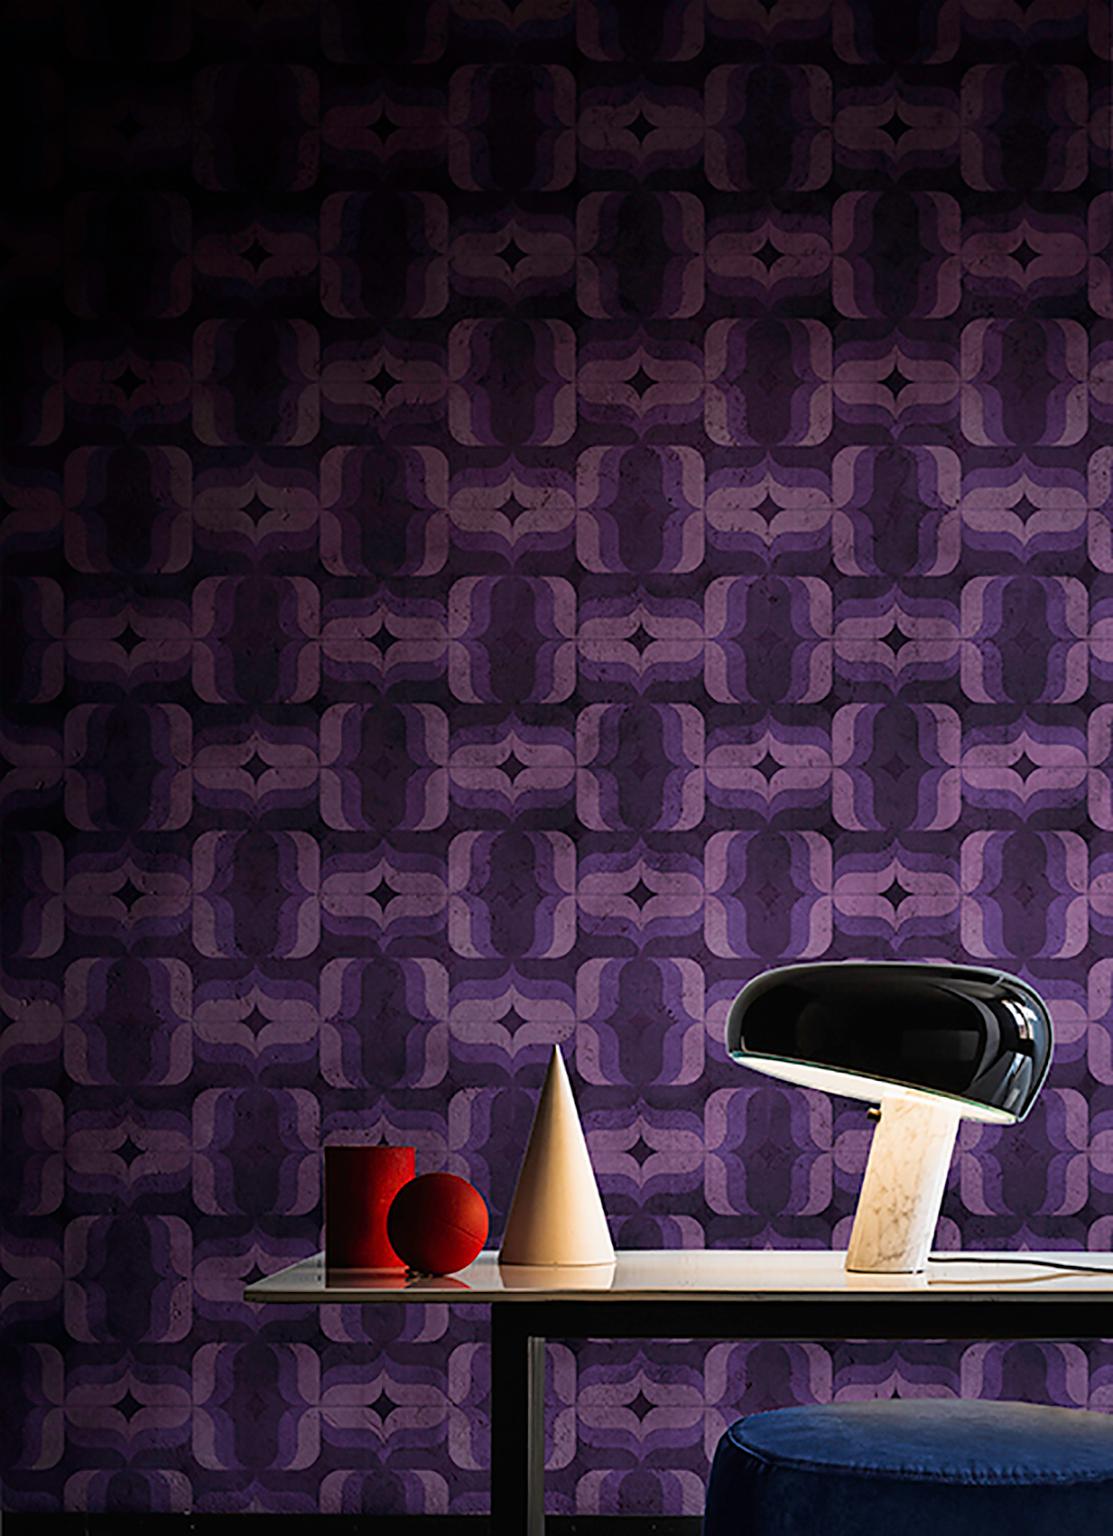 Wall&decò turns from photographs to wall paintings, from tromp-l'oeils to macro-designs on material backgrounds into a vertical wall pattern, with truly original visual effects.

Digital printed vinyl wallpaper with nonwoven backing

Roll size